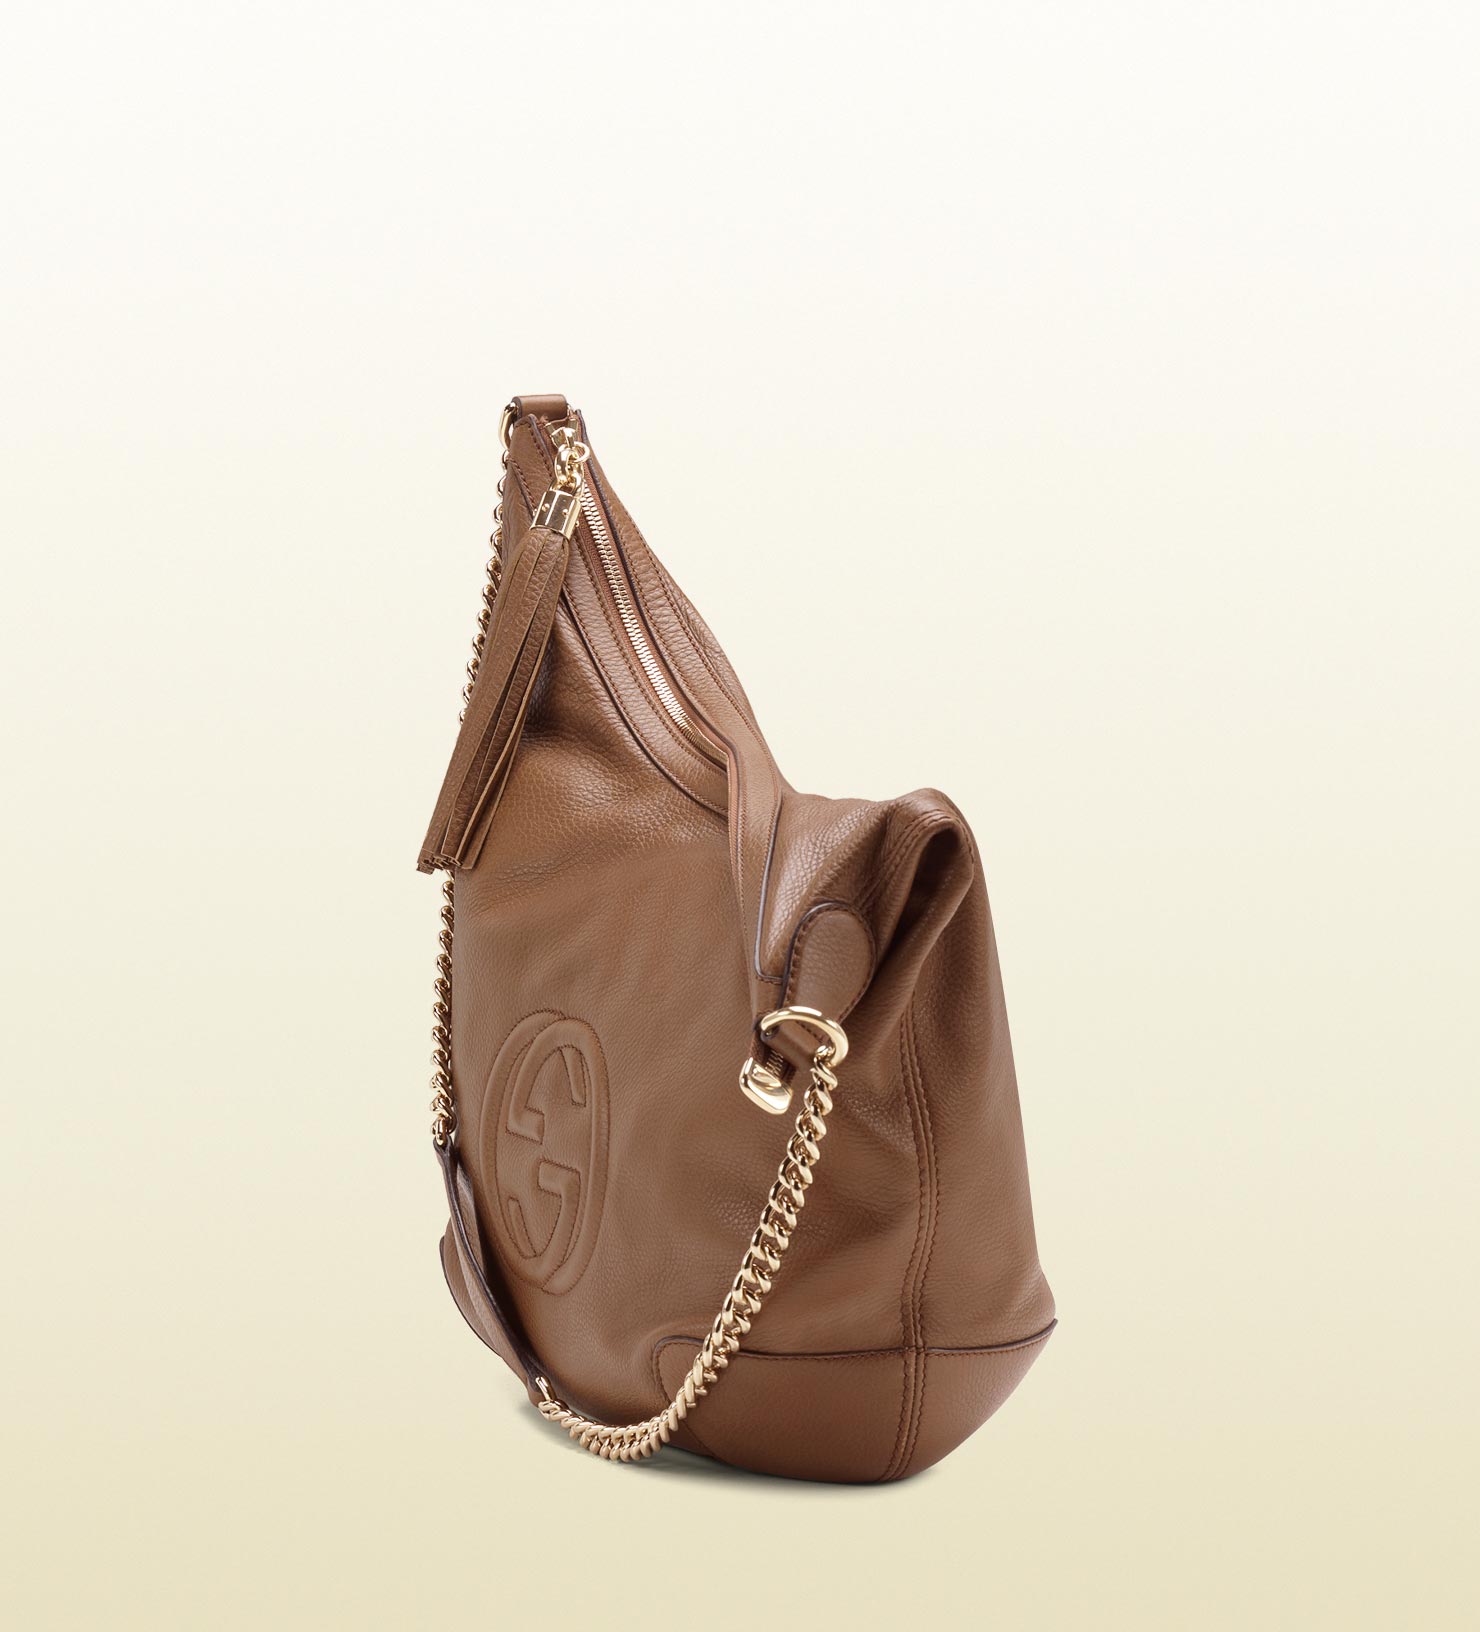 Gucci Soho Maple Brown Leather Shoulder Bag with Chain Strap - Lyst